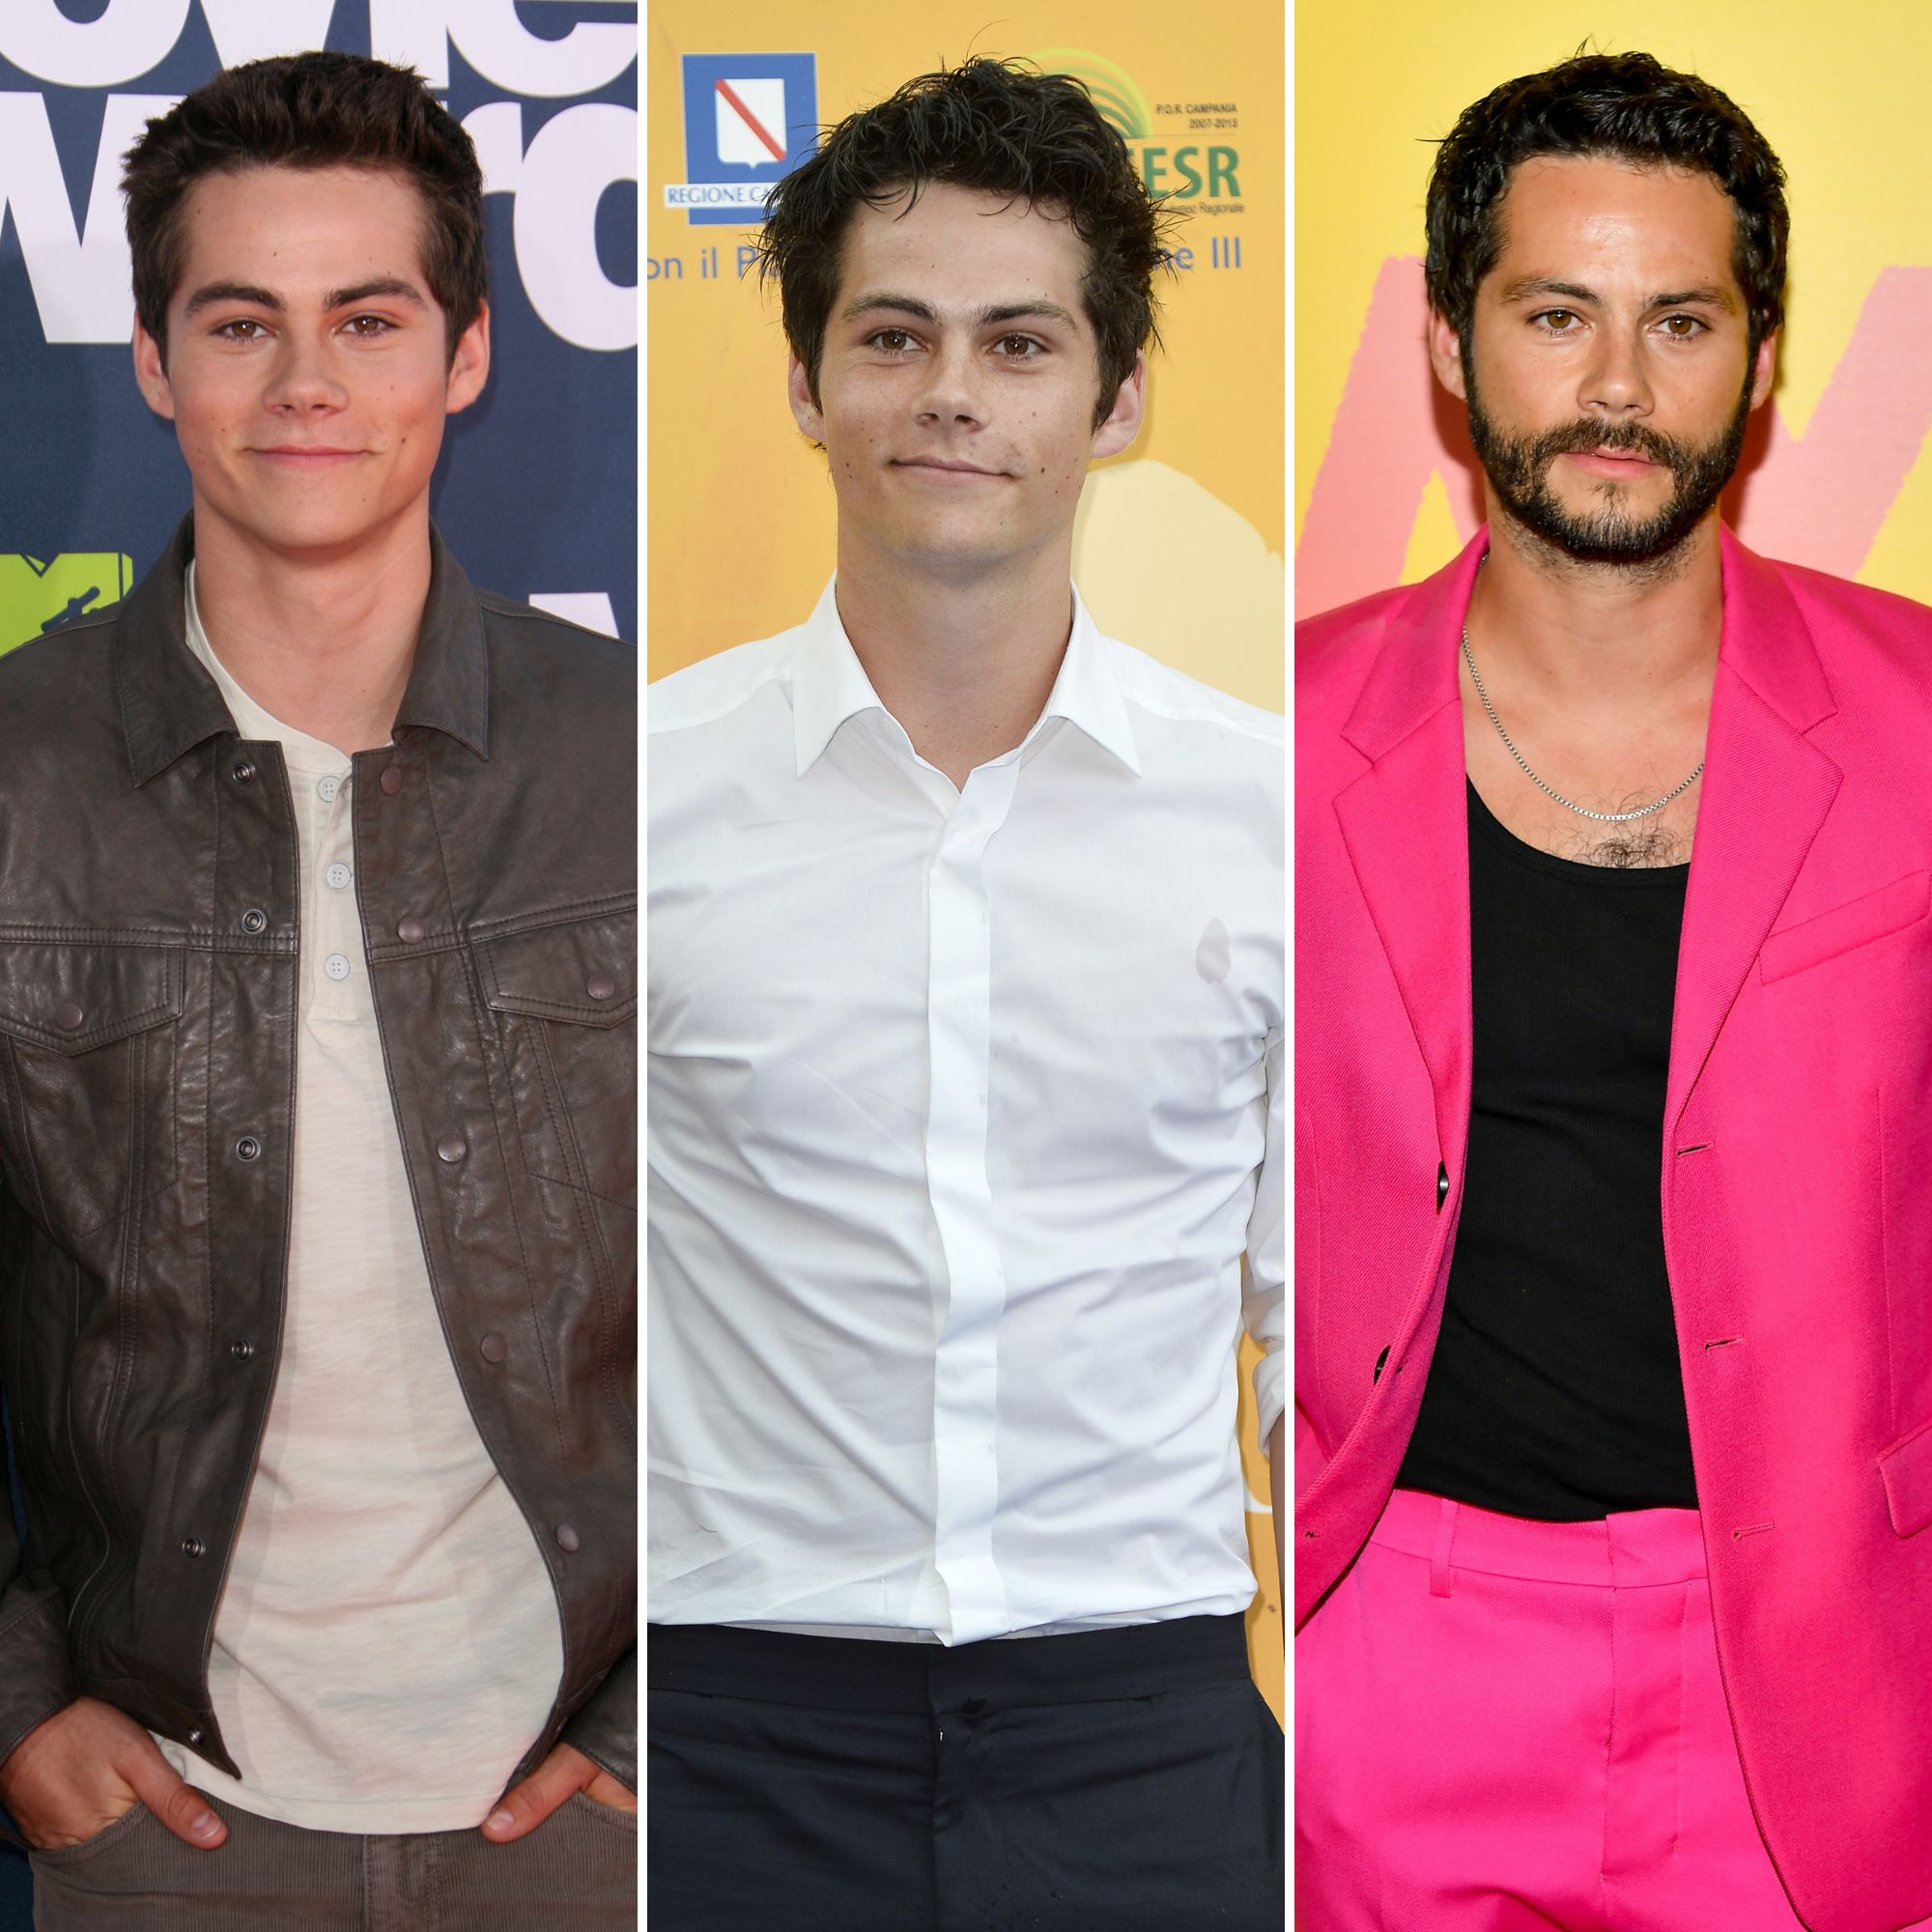 Maze Runner 4 Already Has An Easy Way To Bring Back Dylan O'Brien